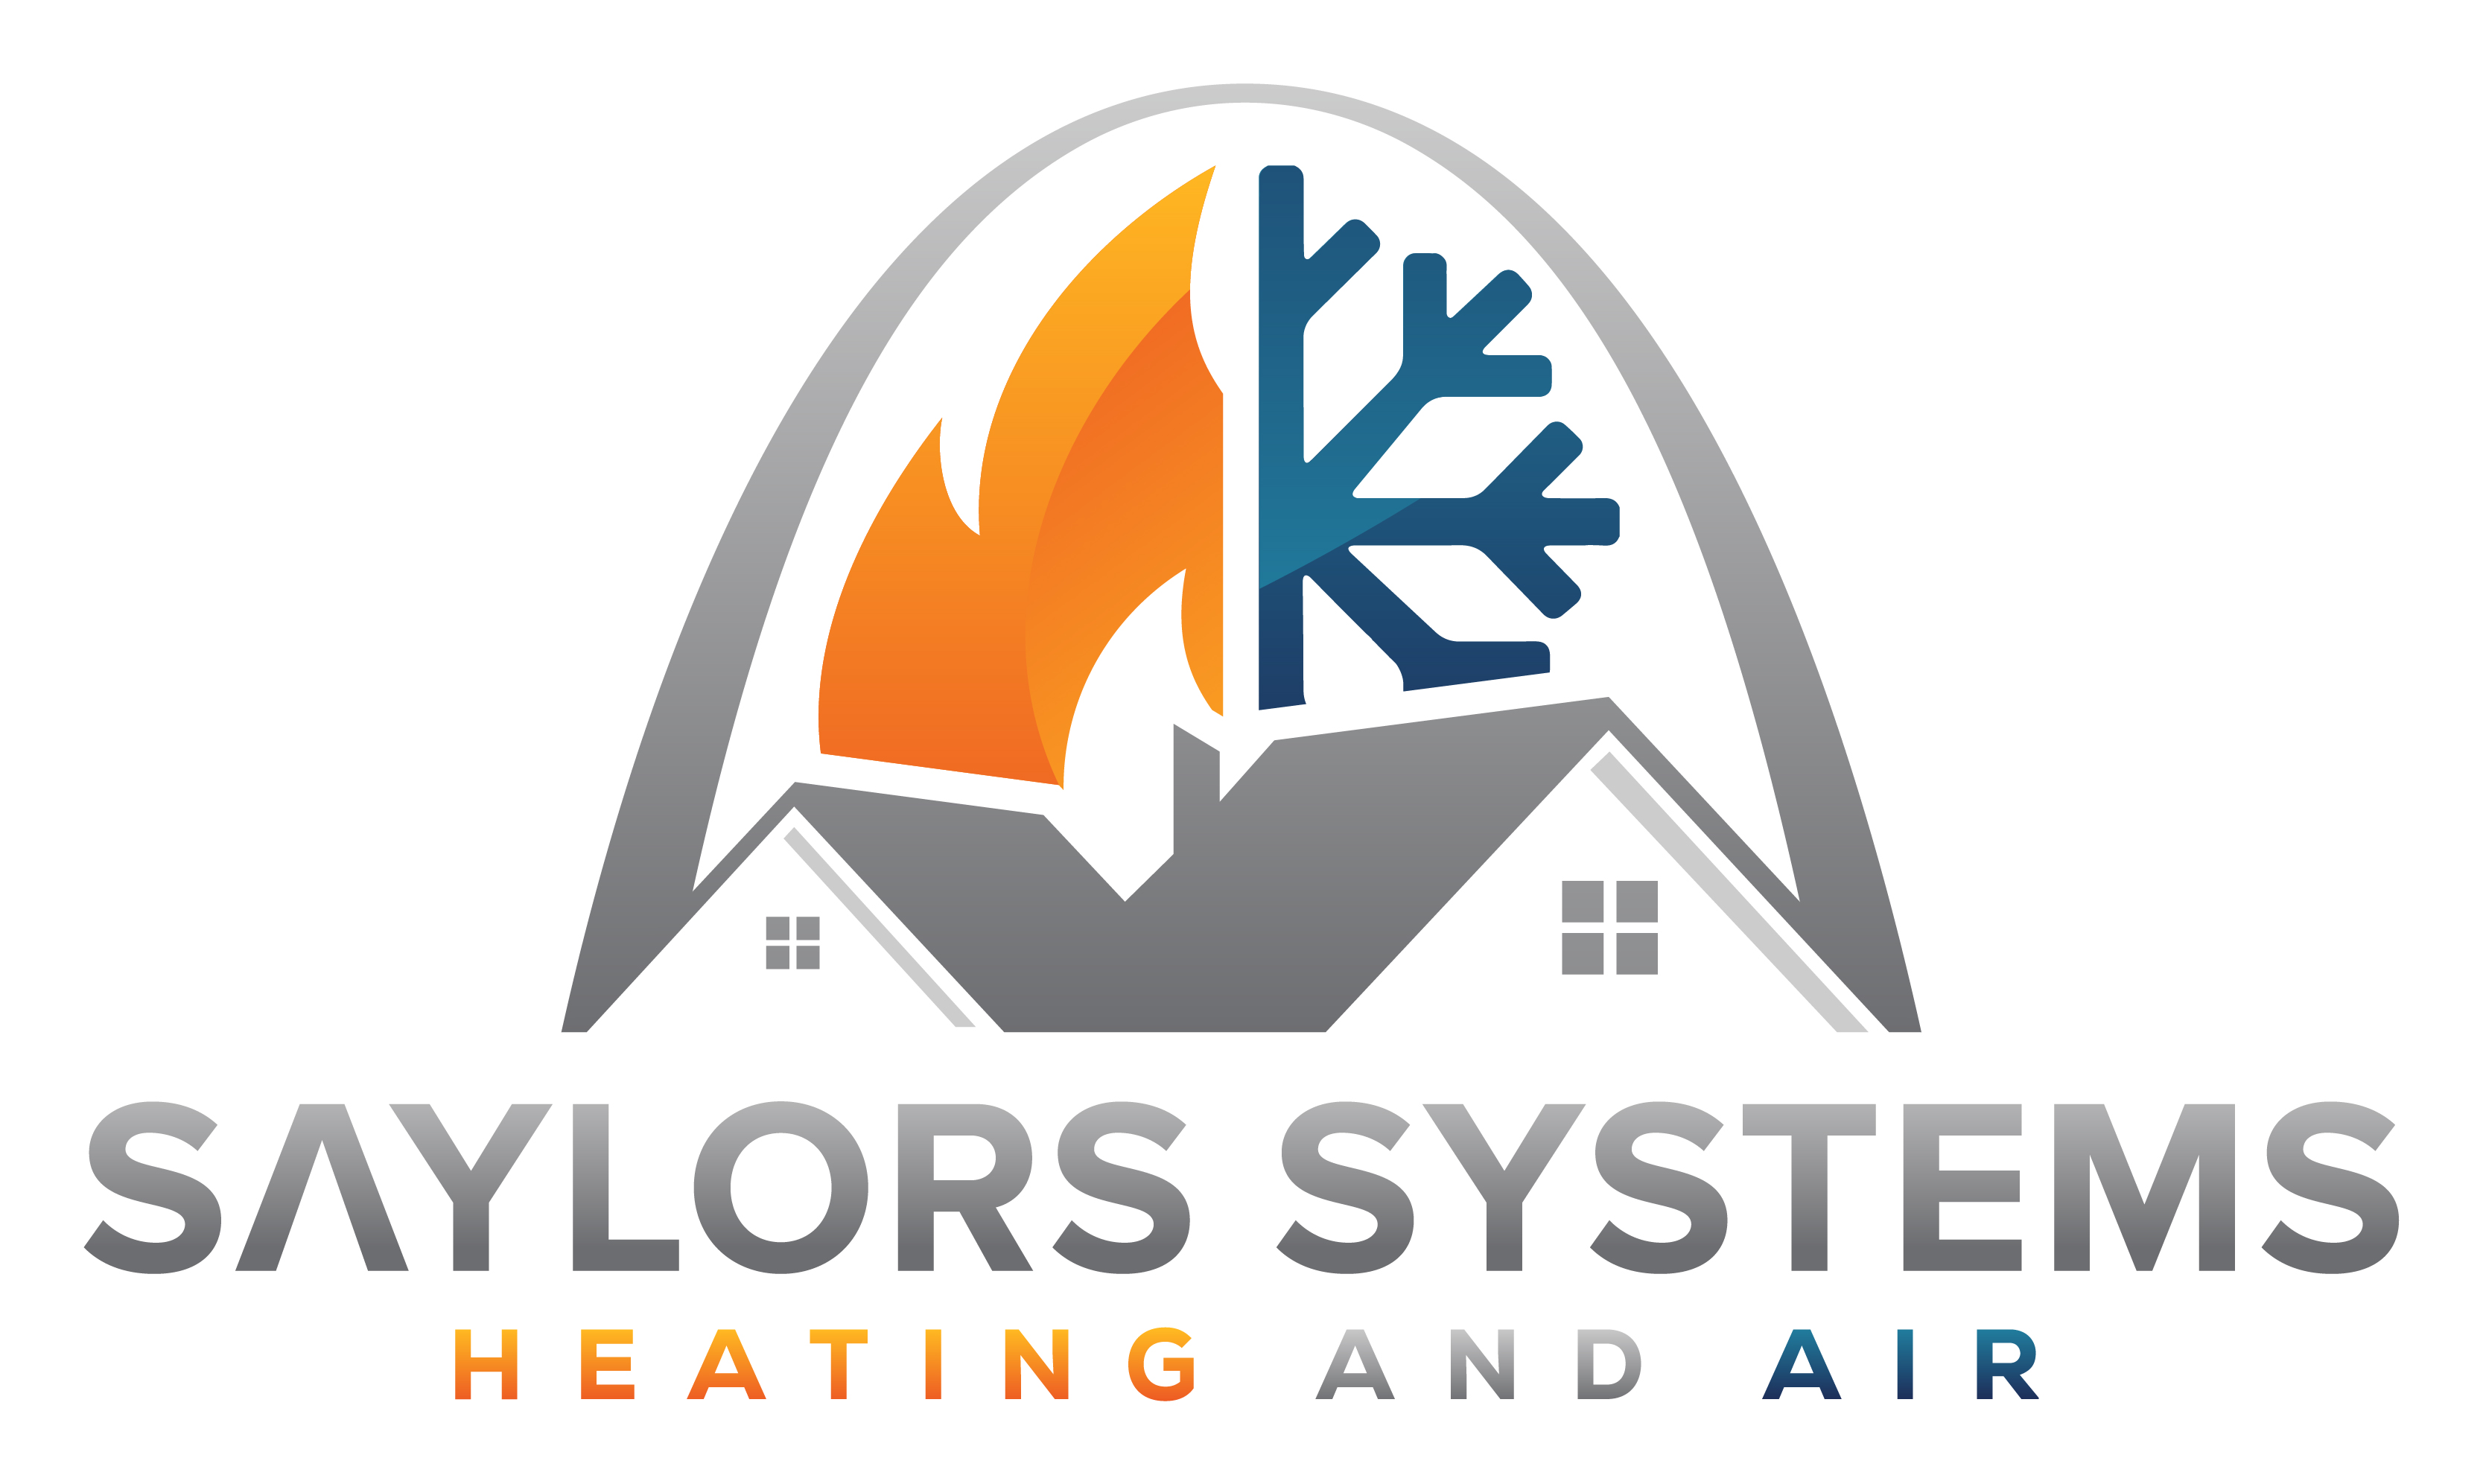 Saylors Systems Heating and Air